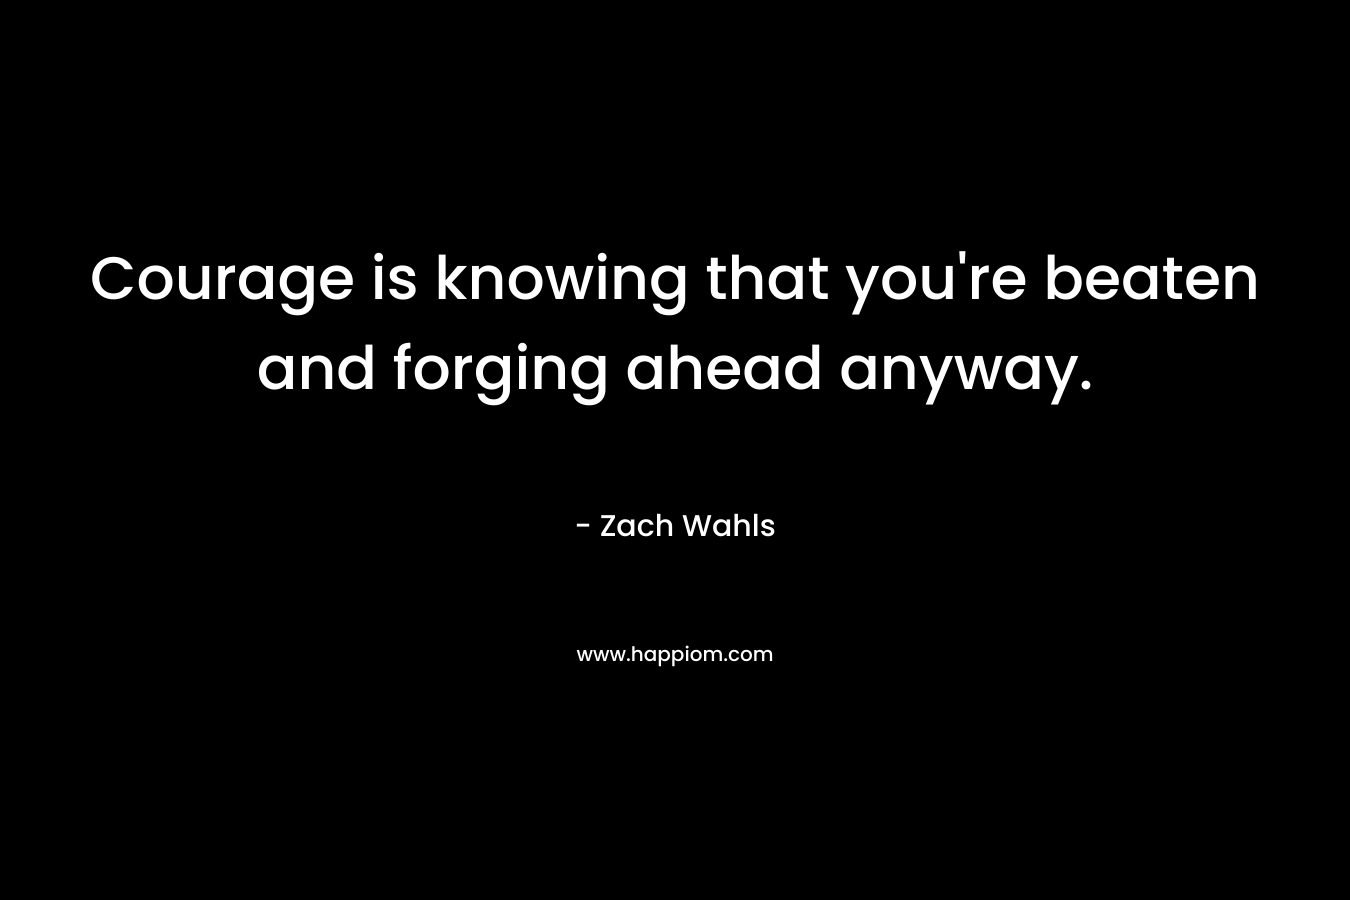 Courage is knowing that you’re beaten and forging ahead anyway. – Zach Wahls